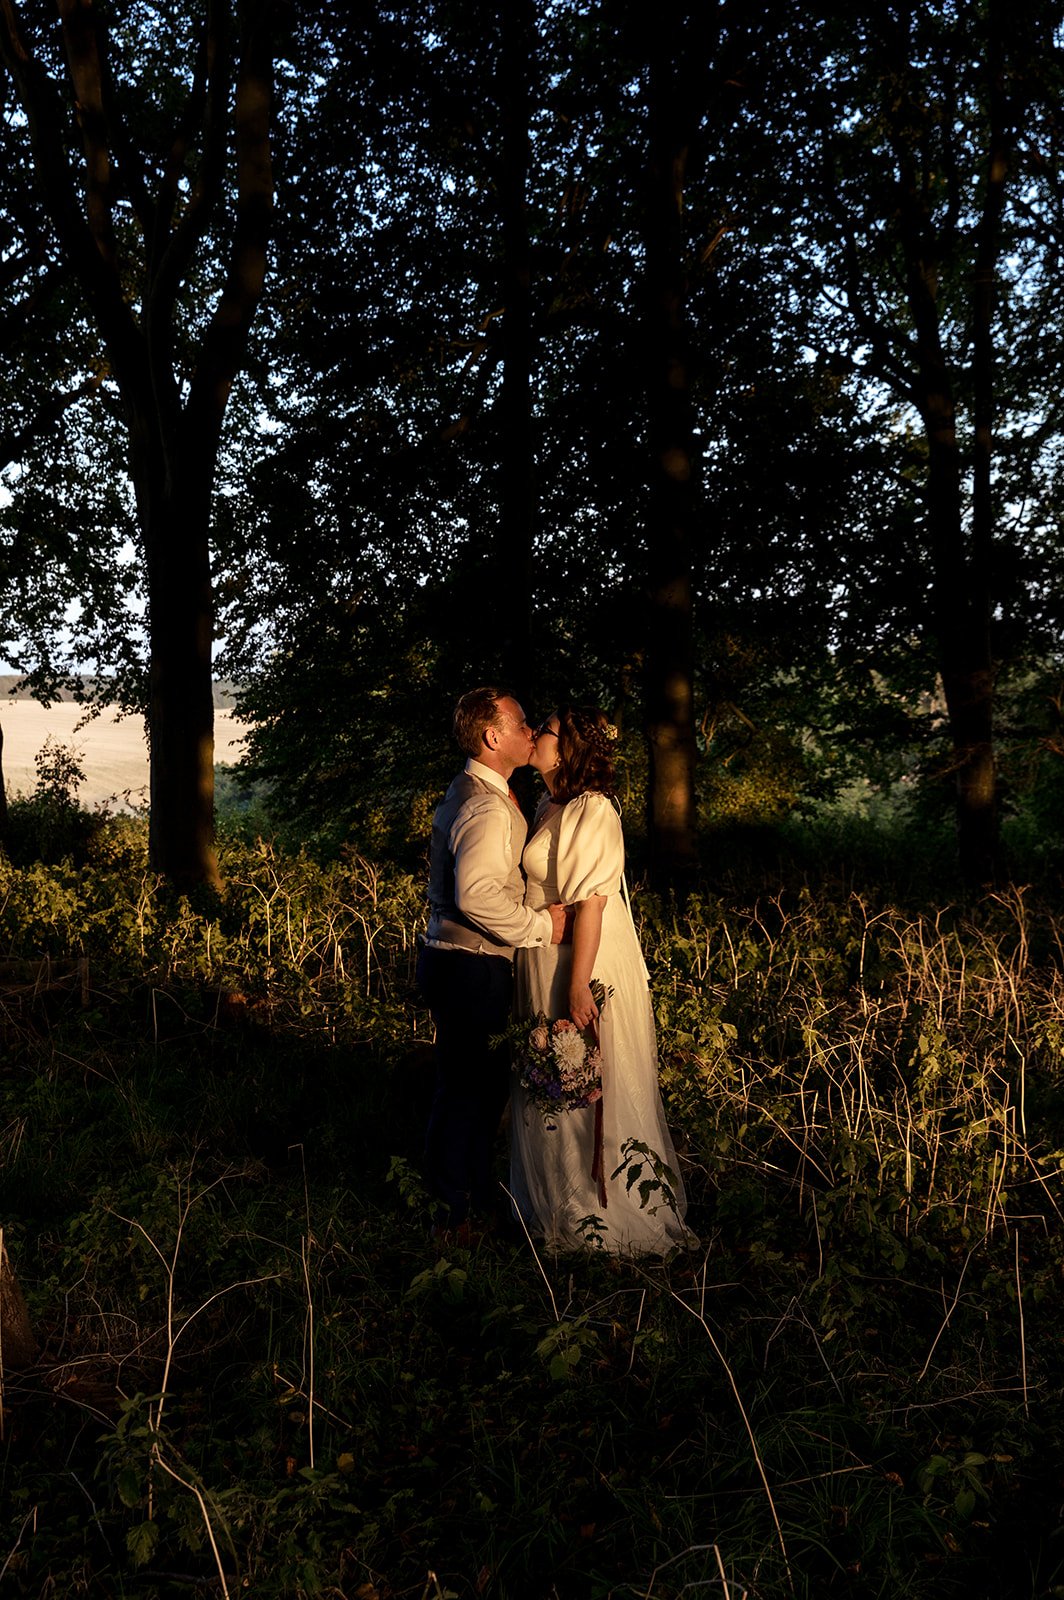 A bride and groom photographed in a woodland setting with dramatic low sunlight